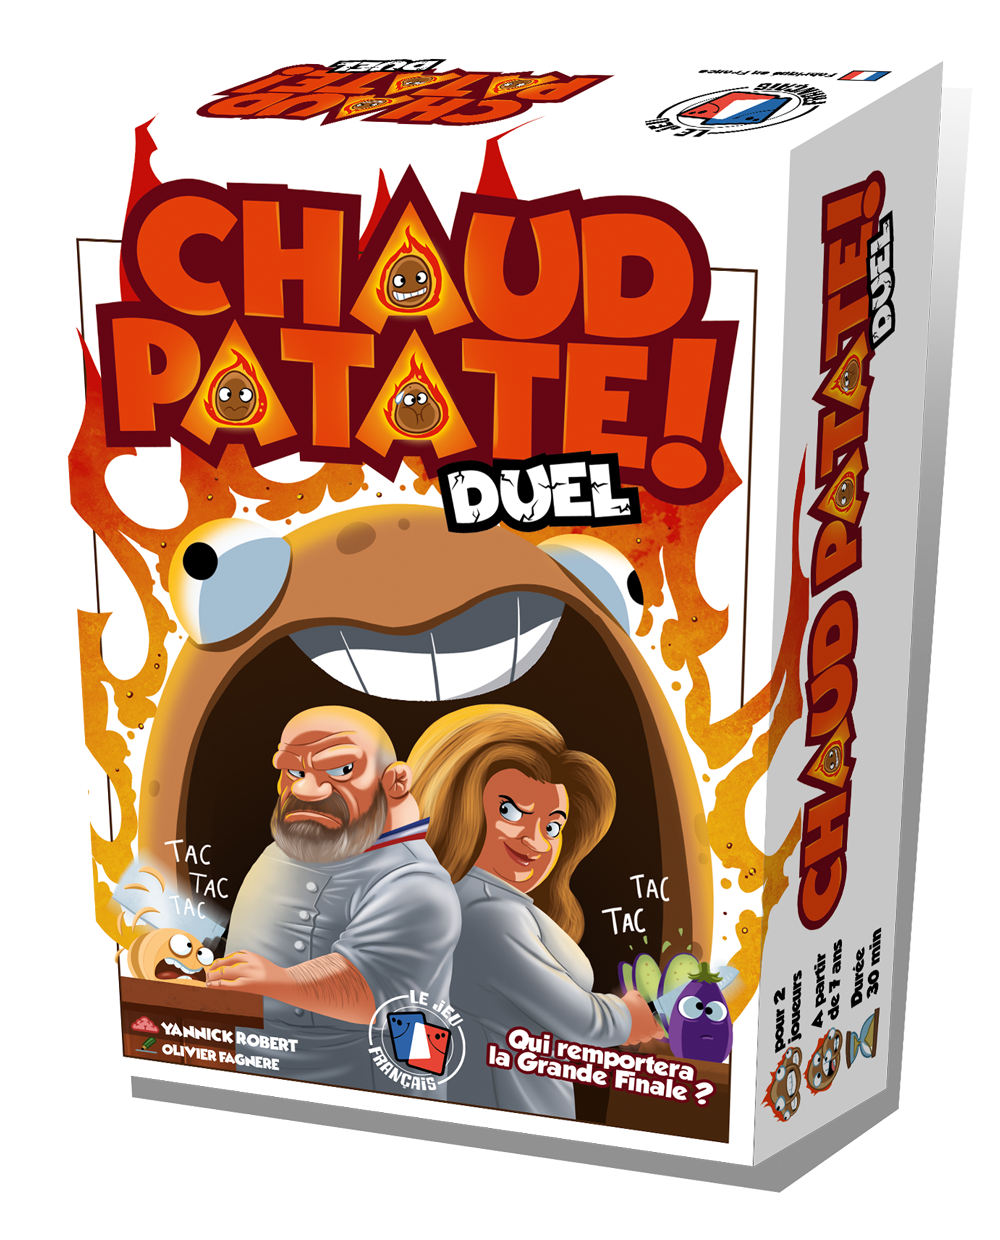 Chaud Patate Duel